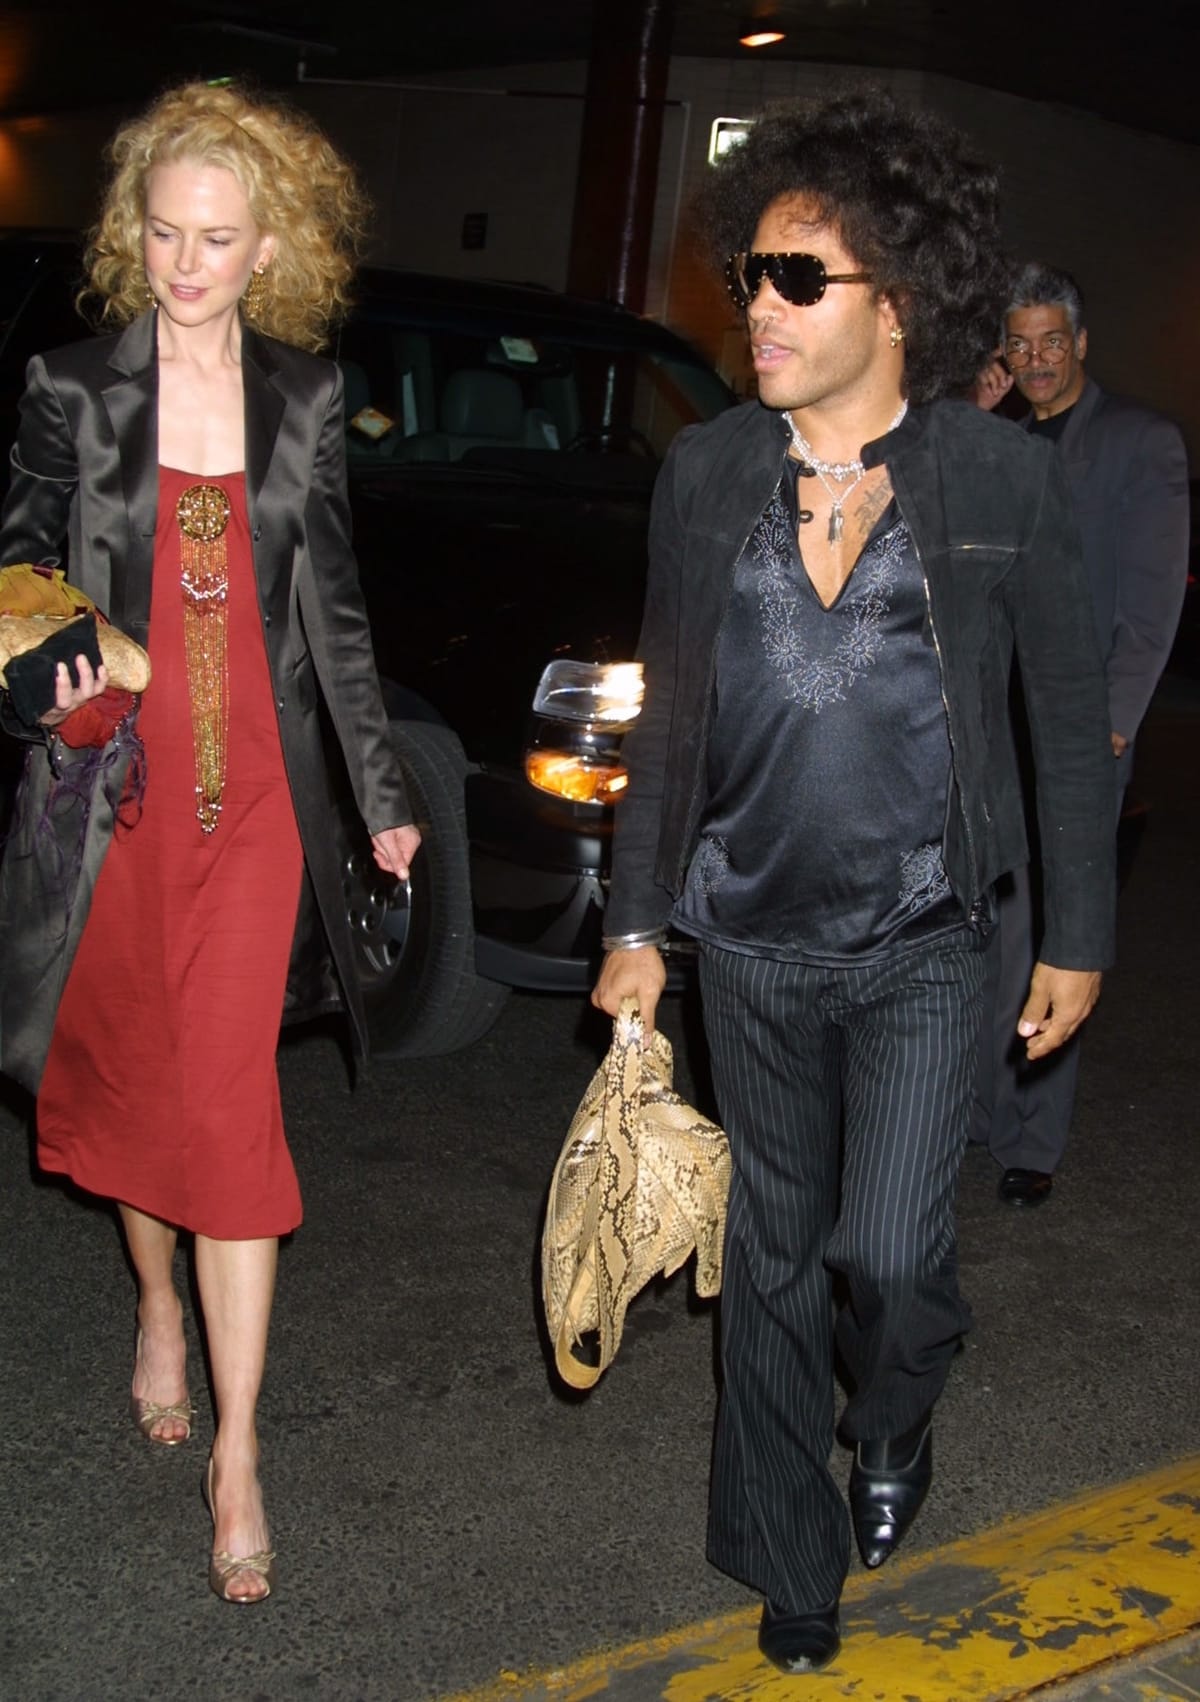 Capturing a chapter of love: Nicole Kidman and Lenny Kravitz during their engagement period, 2002-2003